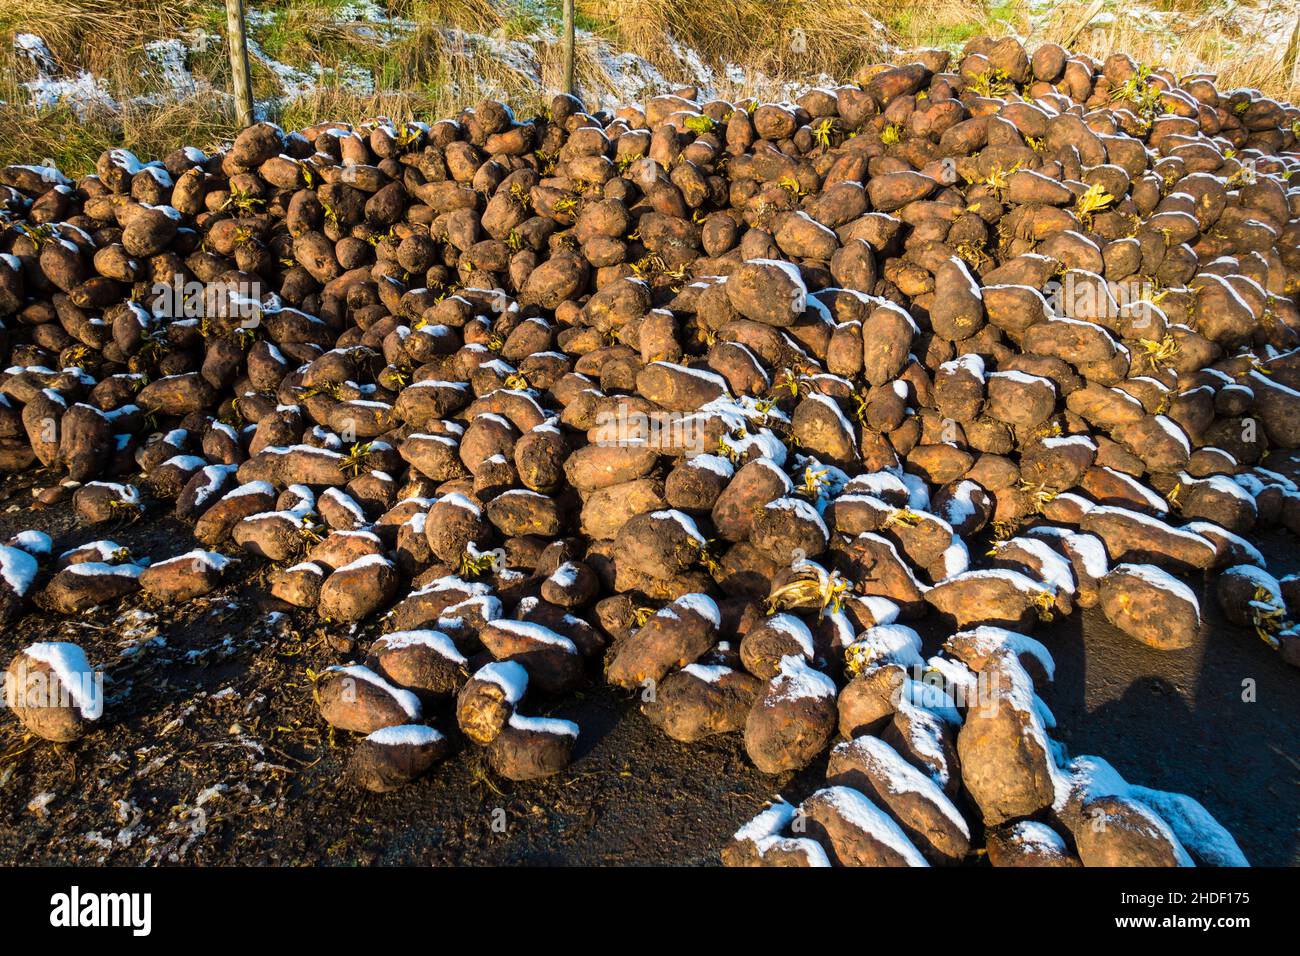 Pile of Swedes root vegetables to be used for animal feed, UK. Stock Photo